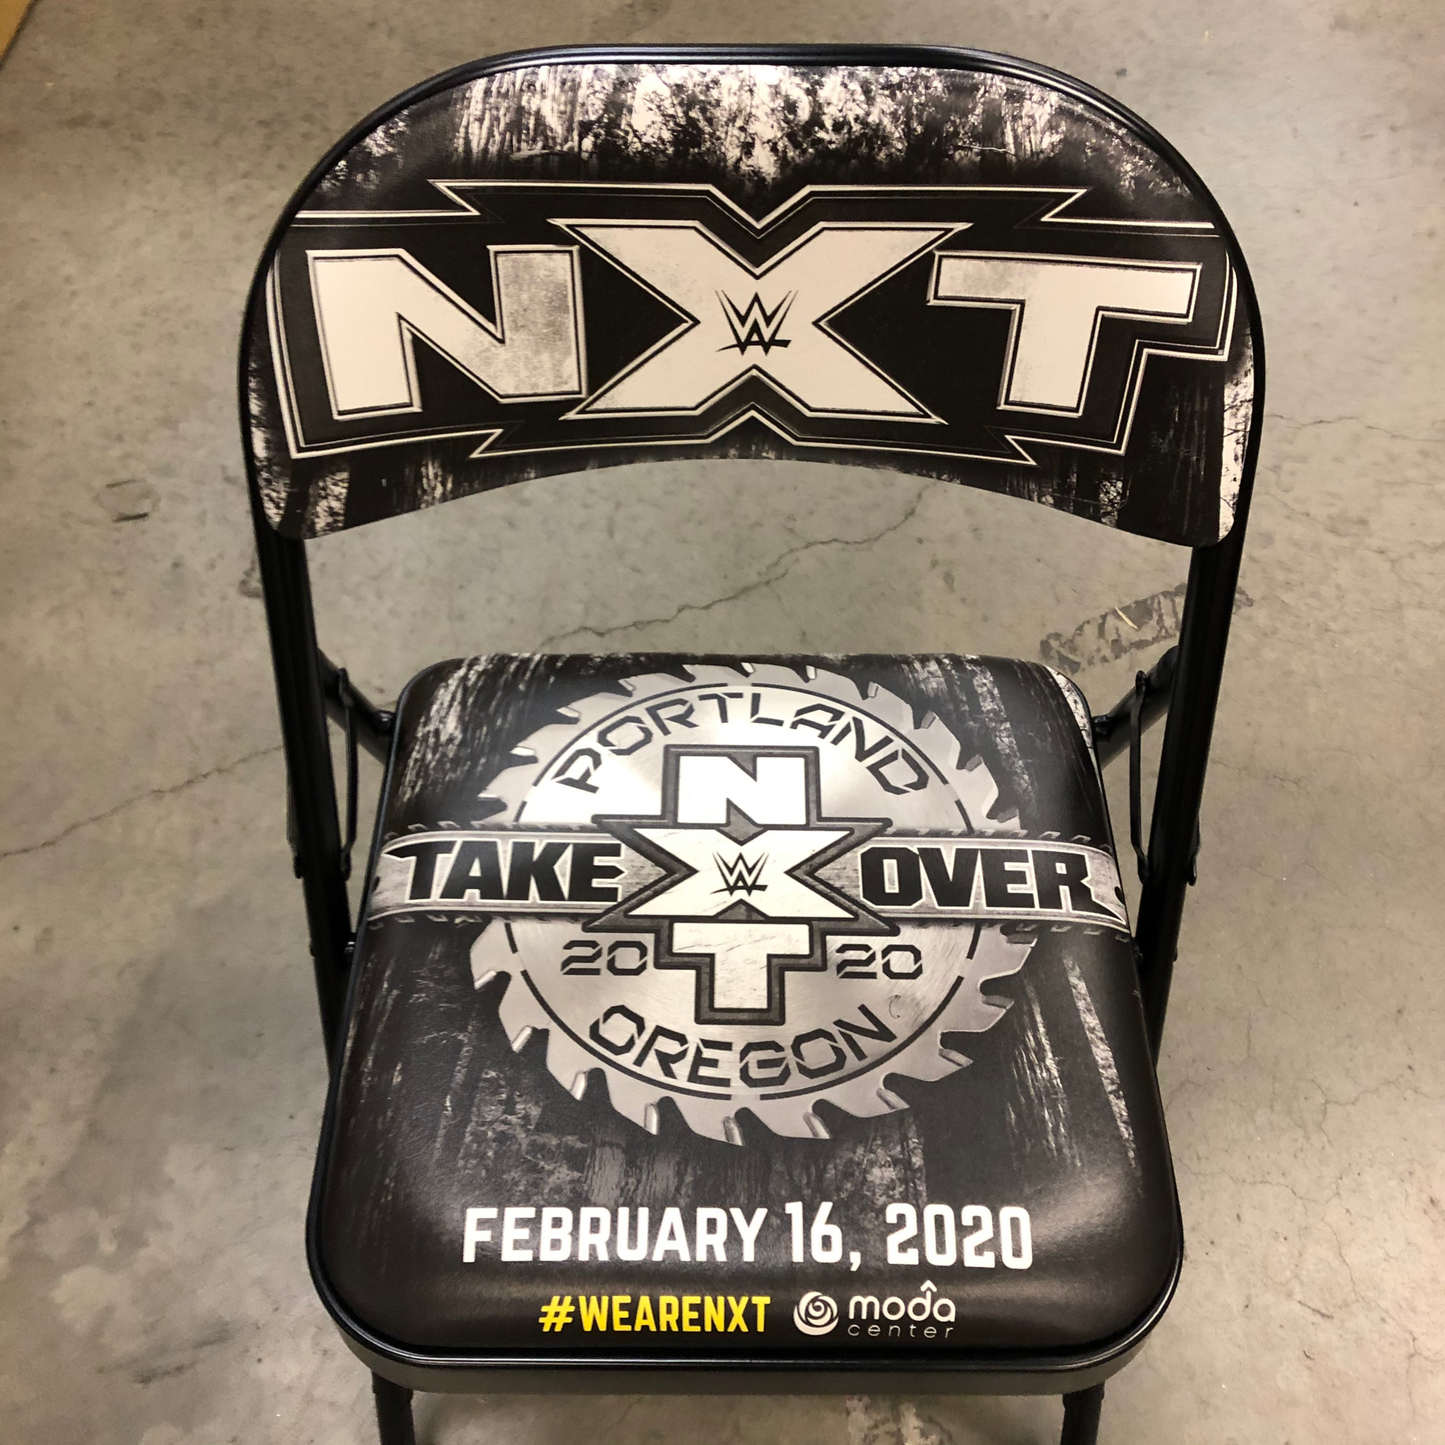 NXT TAKEOVER PORTLAND 2020